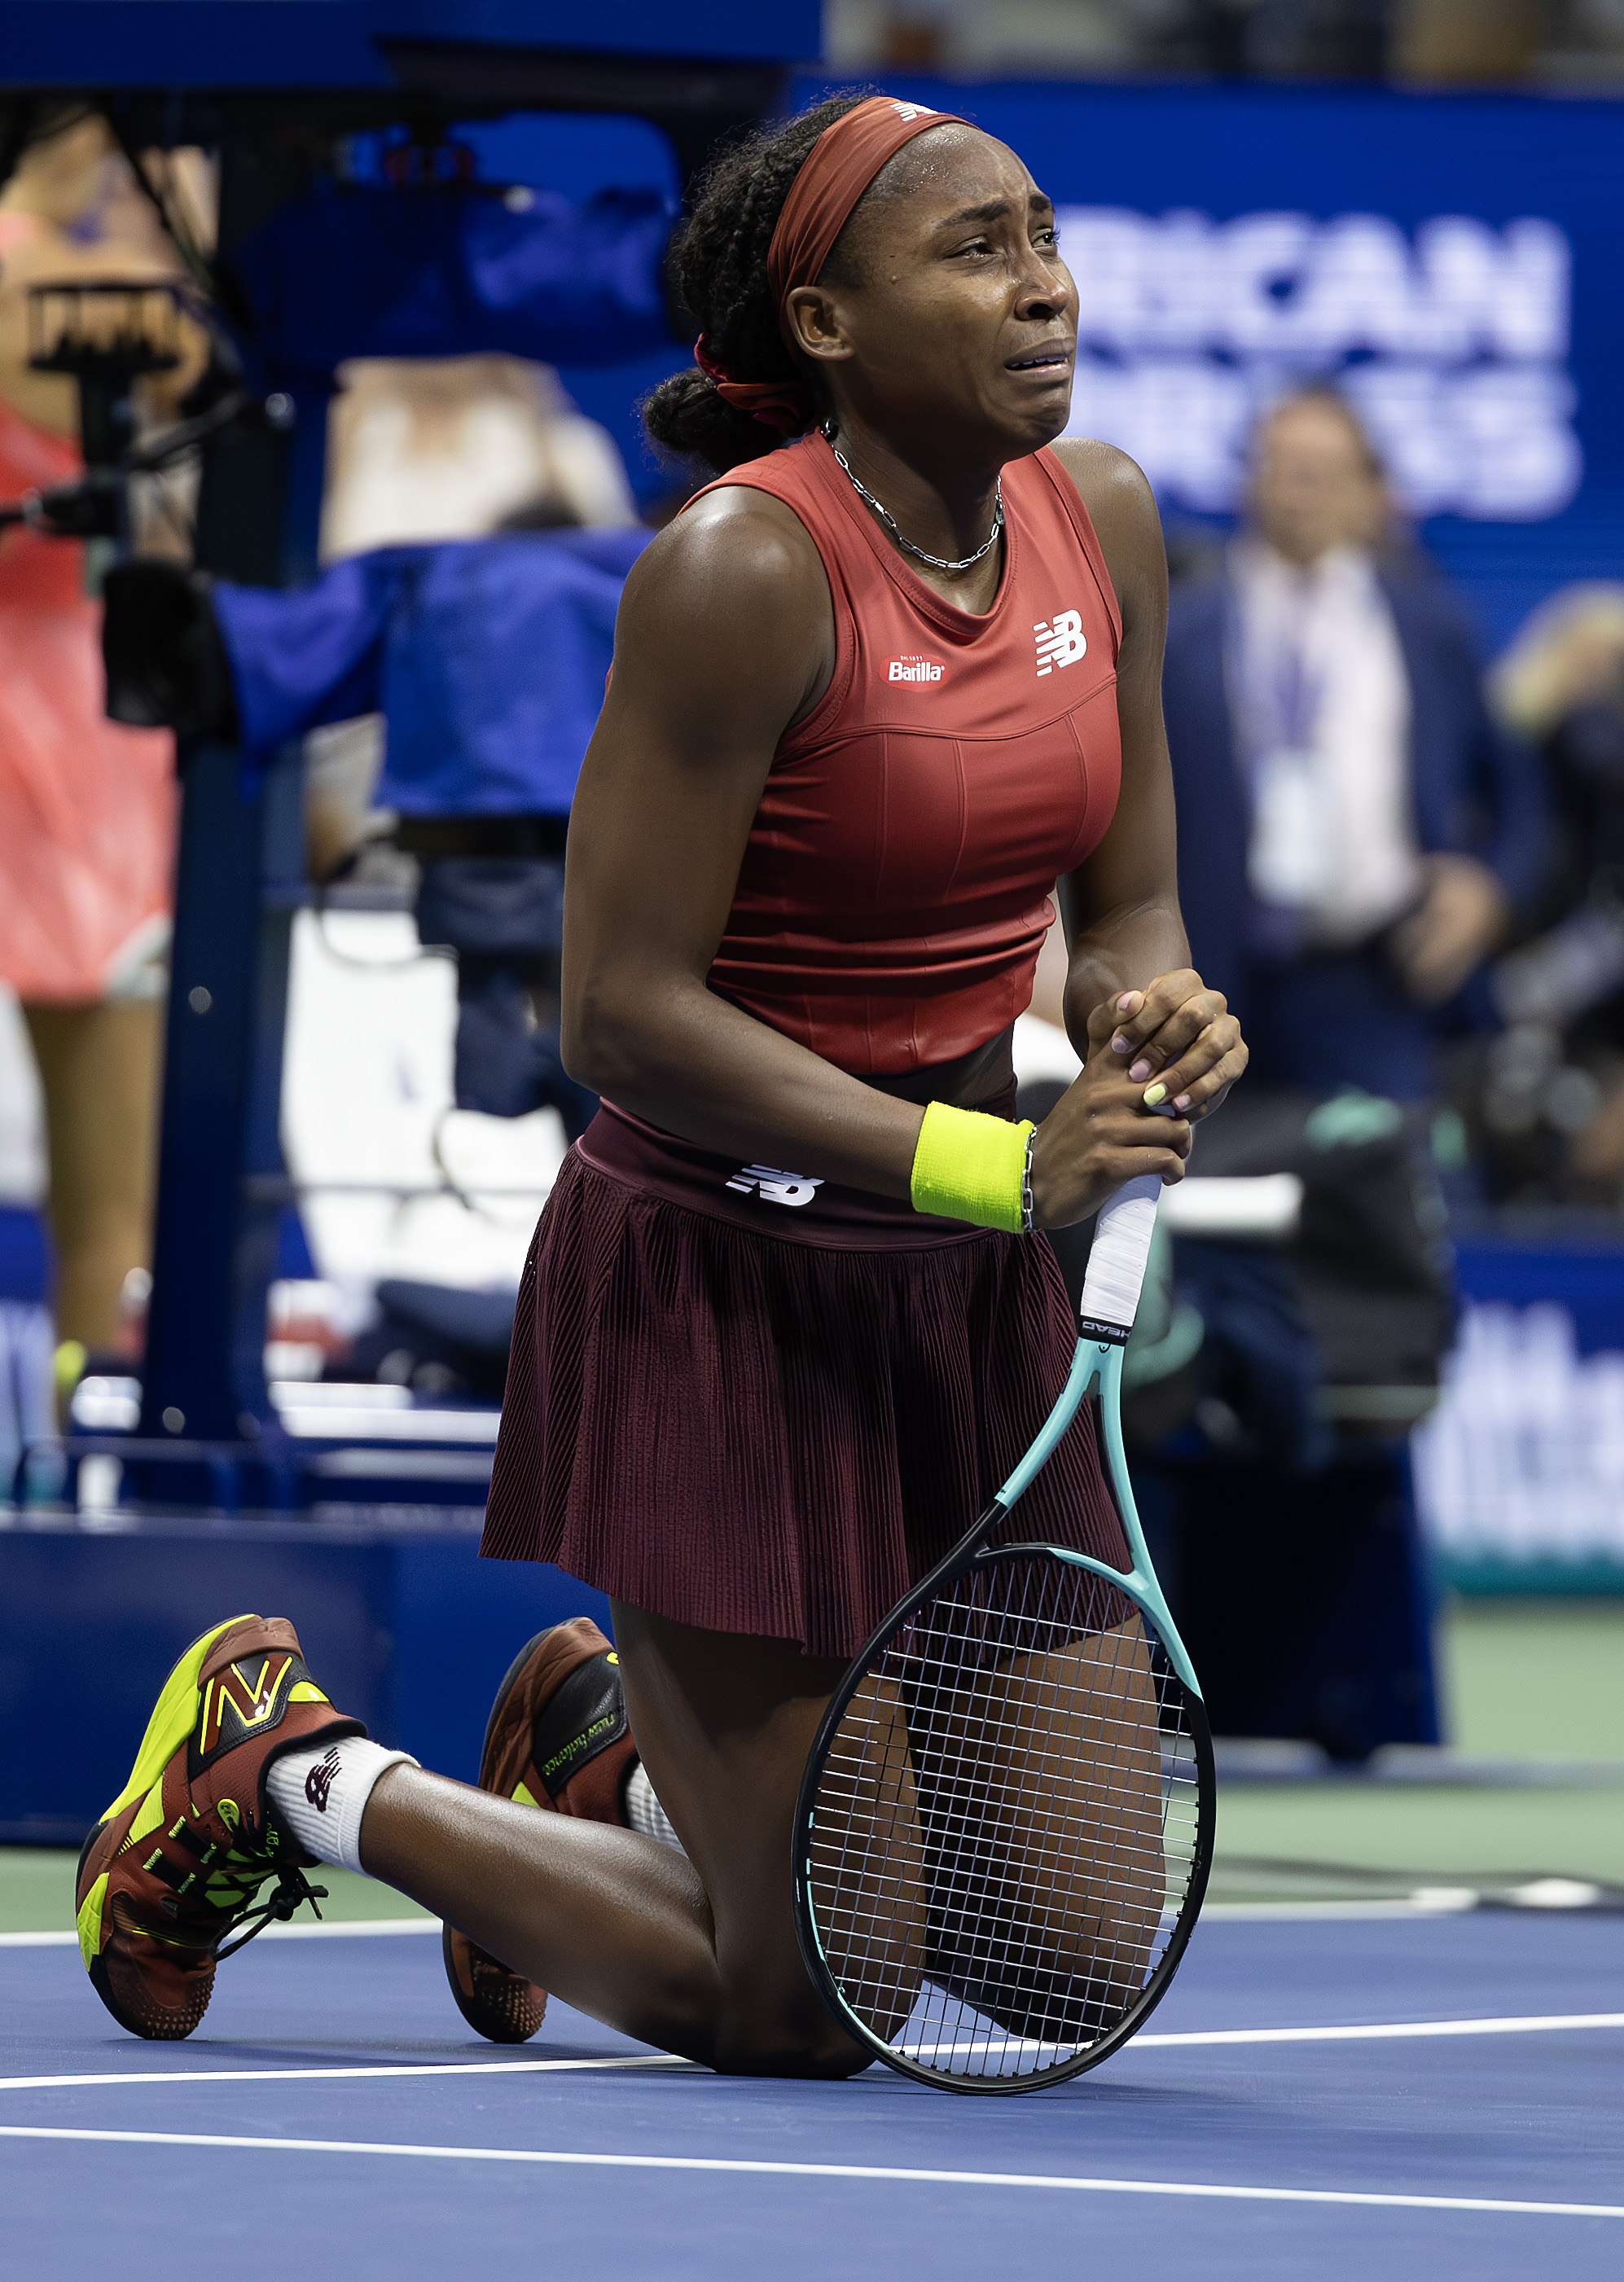 Coco Gauff celebrates after defeating Aryna Sabalenka in their Women's Singles Final match at the 2023 US Open at the USTA Billie Jean King National Tennis Center, on September 9, 2023 in Queens, New York City.  | Source: Getty Images